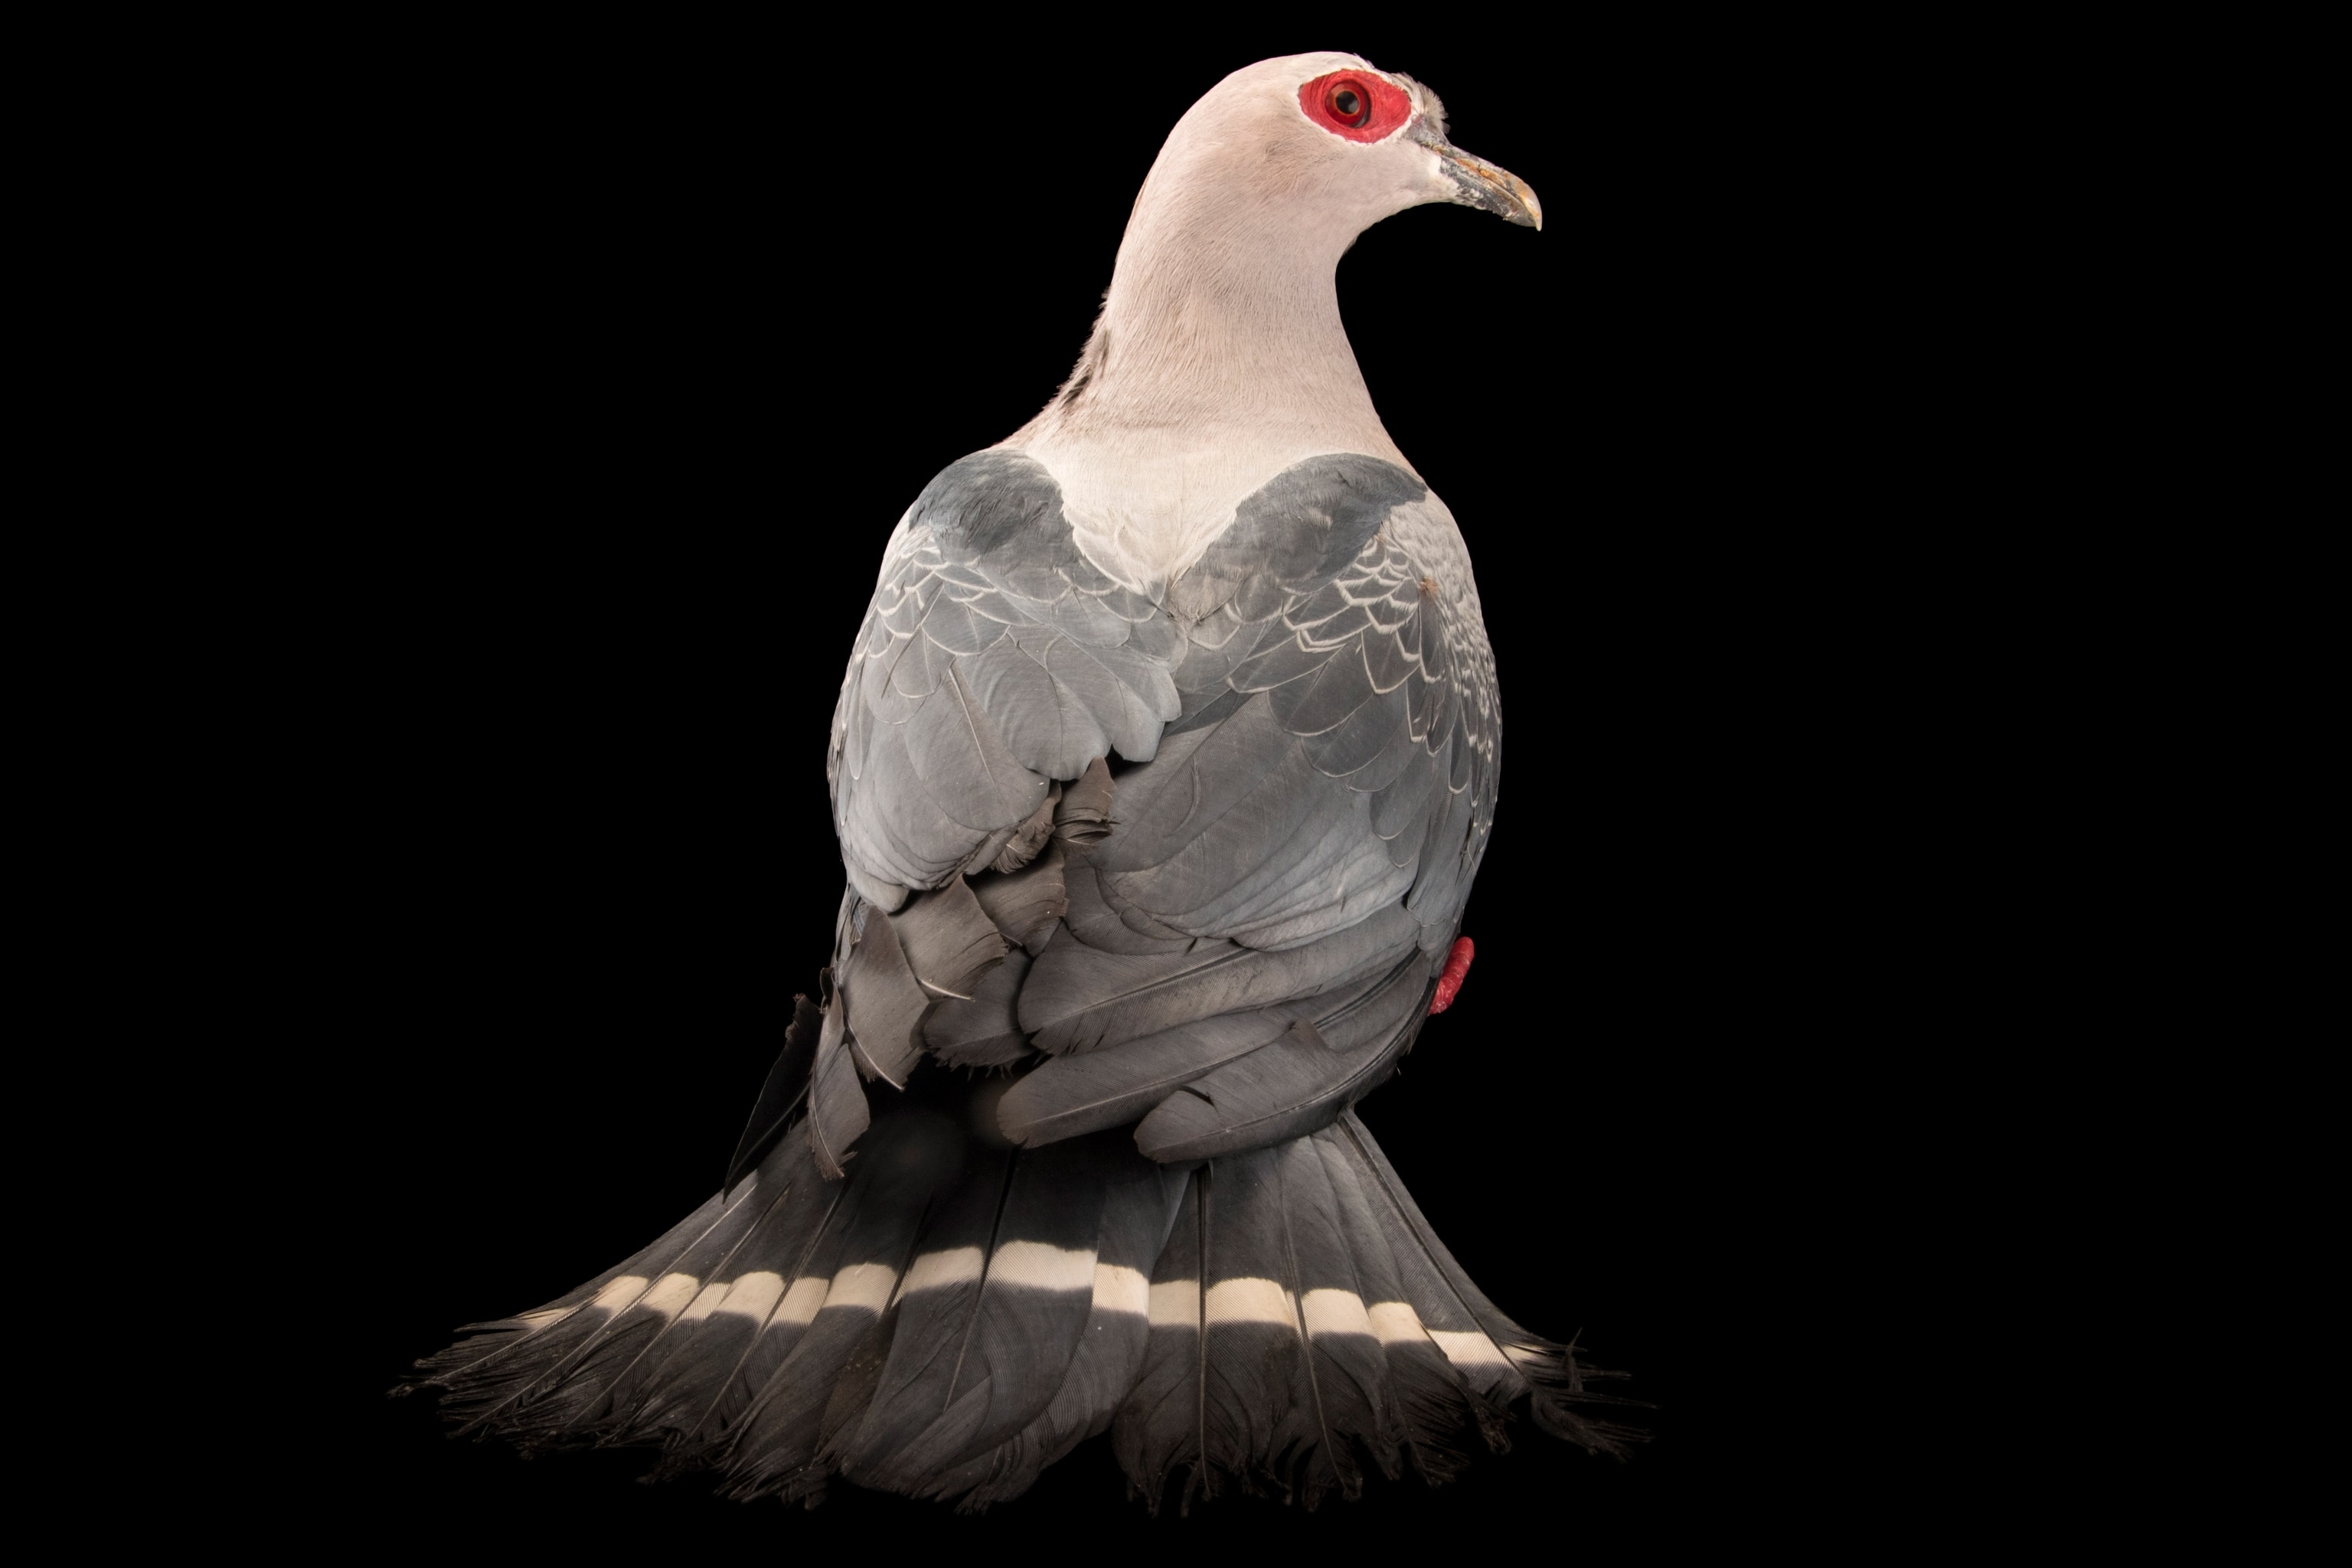 Studio photograph of a Pinon's imperial pigeon